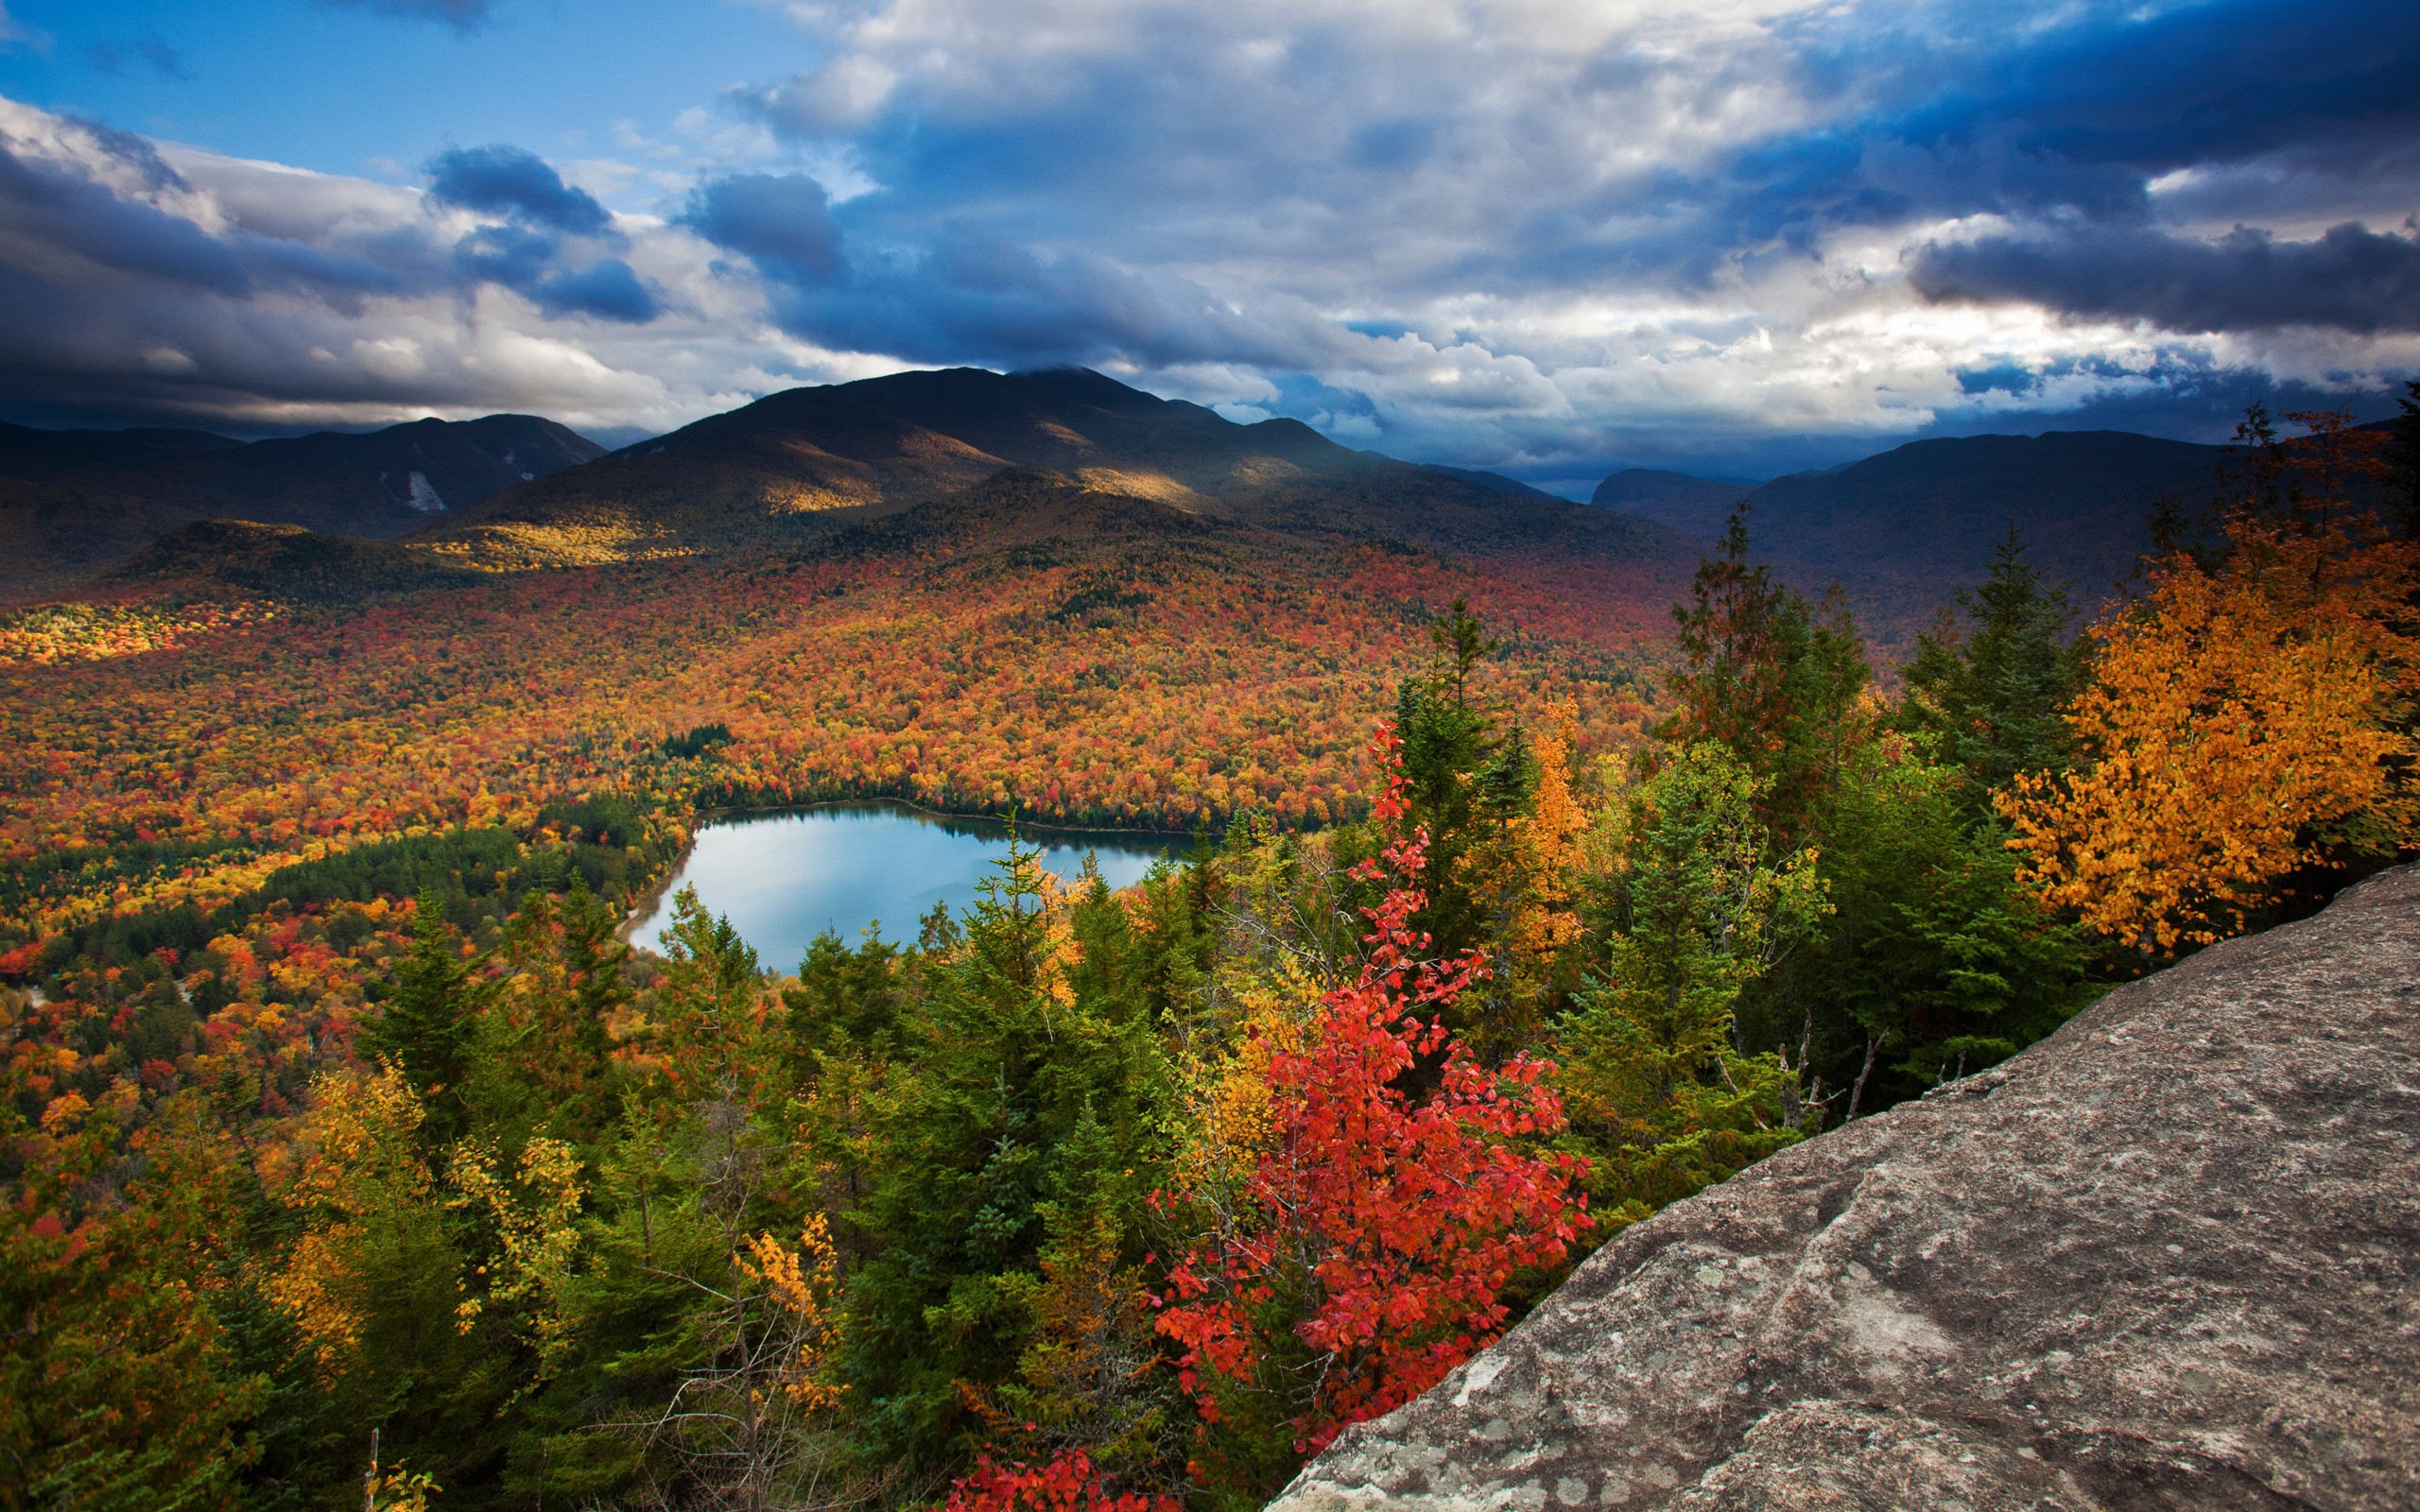 General 2560x1600 national park nature landscape fall trees